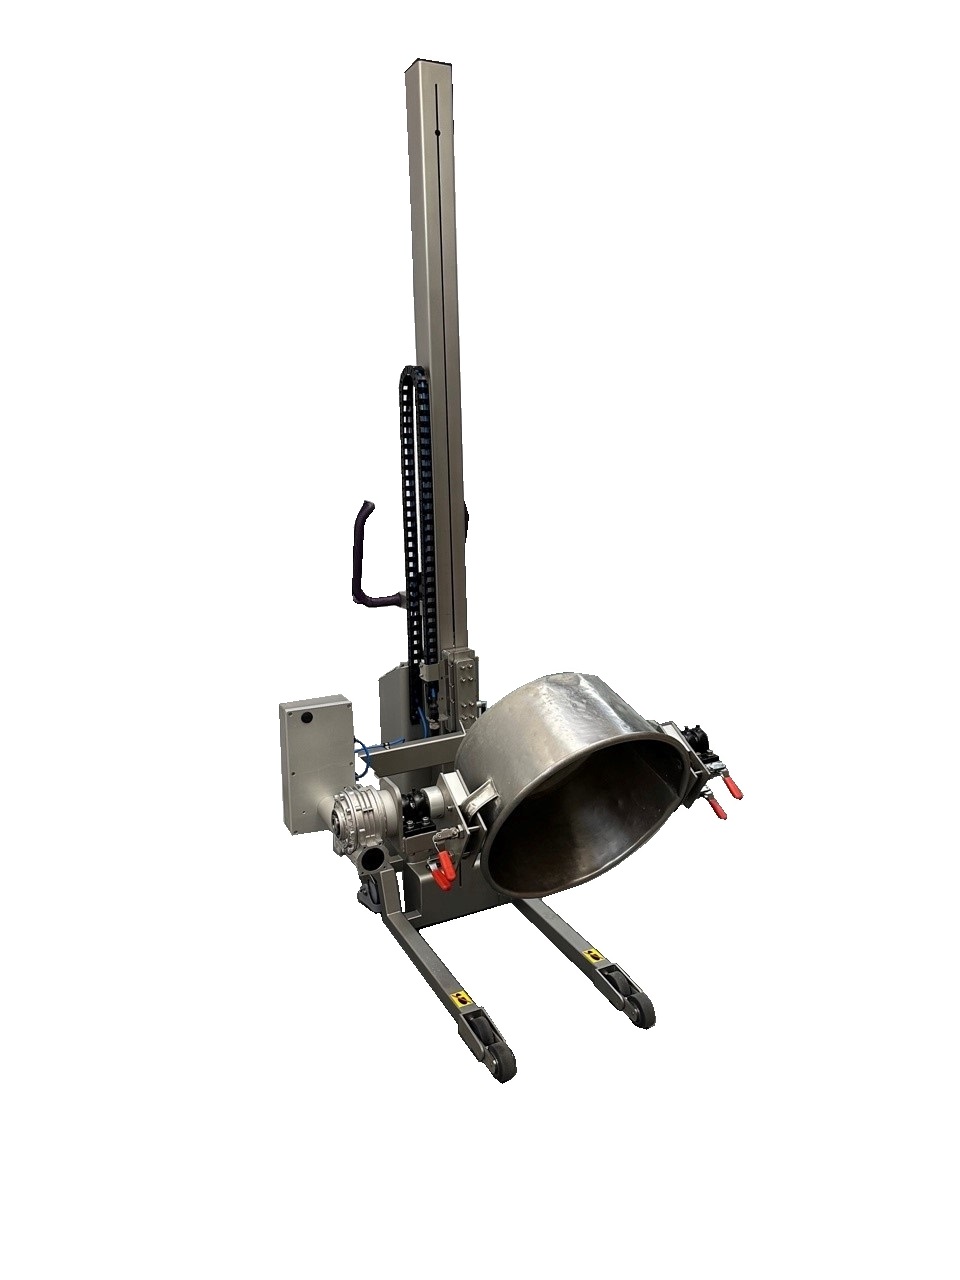  Packline Materials Handling Announce The Production Of Their New Stainless Mixing Bowl Handling Attachment To Lift And Forward Tilt Mixing Bowls Of Ingredients In A Clean Room Environment 